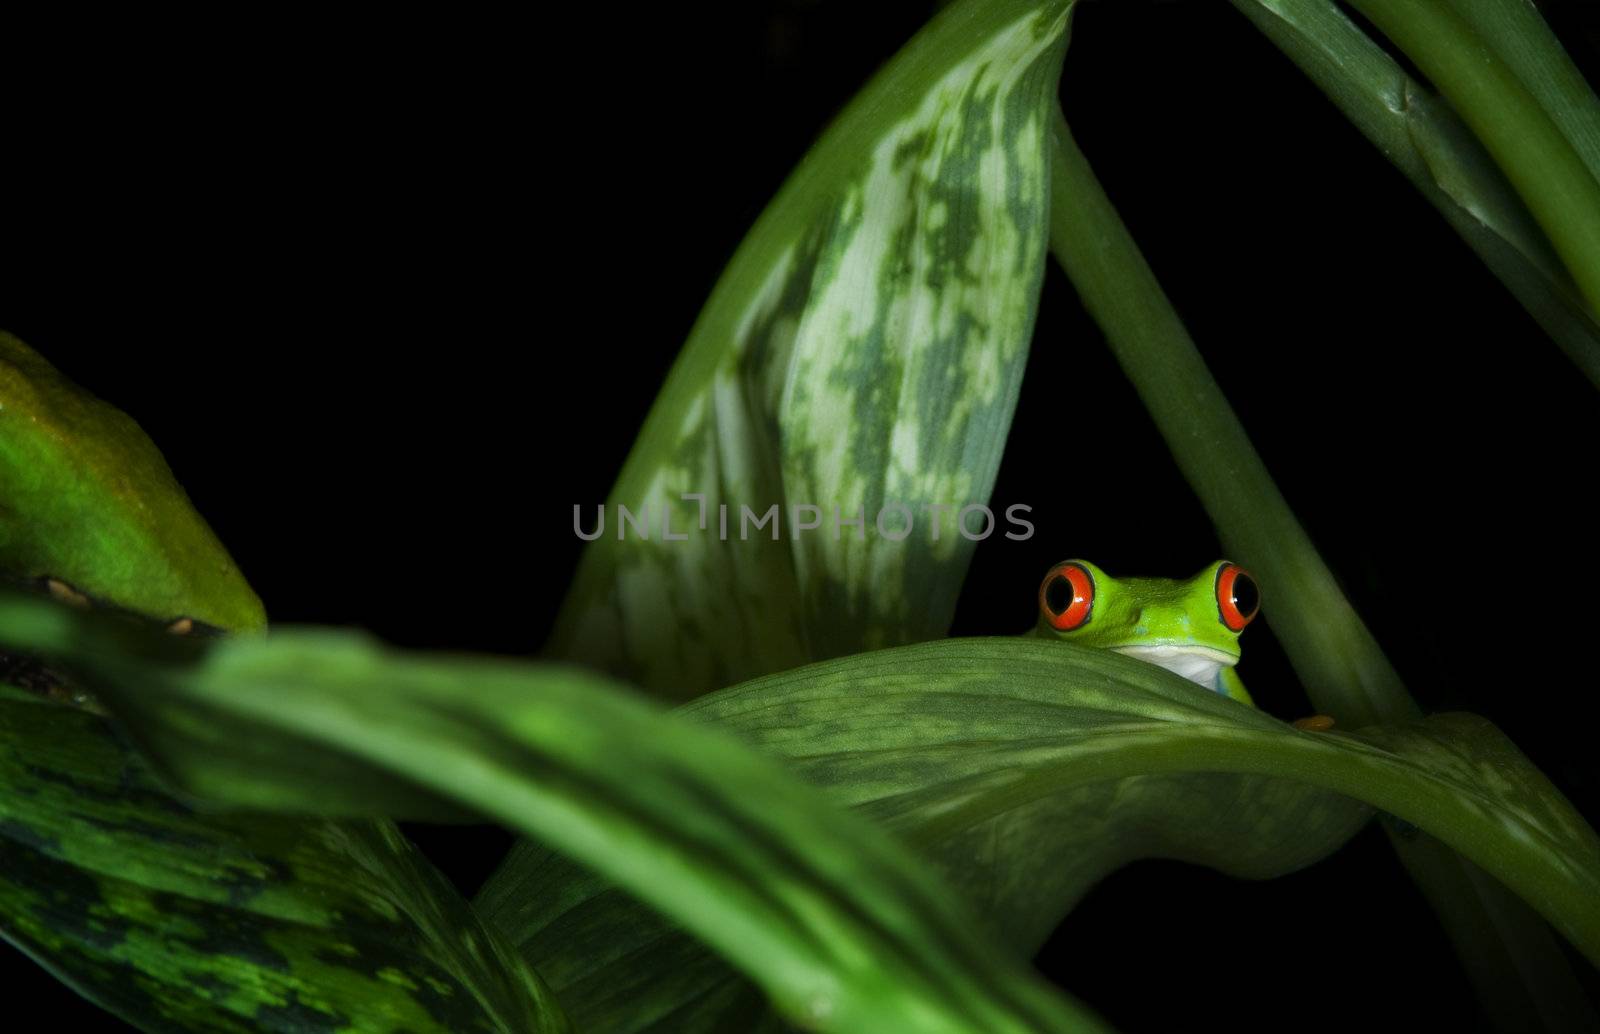 Red Eyed Tree Frog (Agalychnis callidryas) trying to hide among leaves.